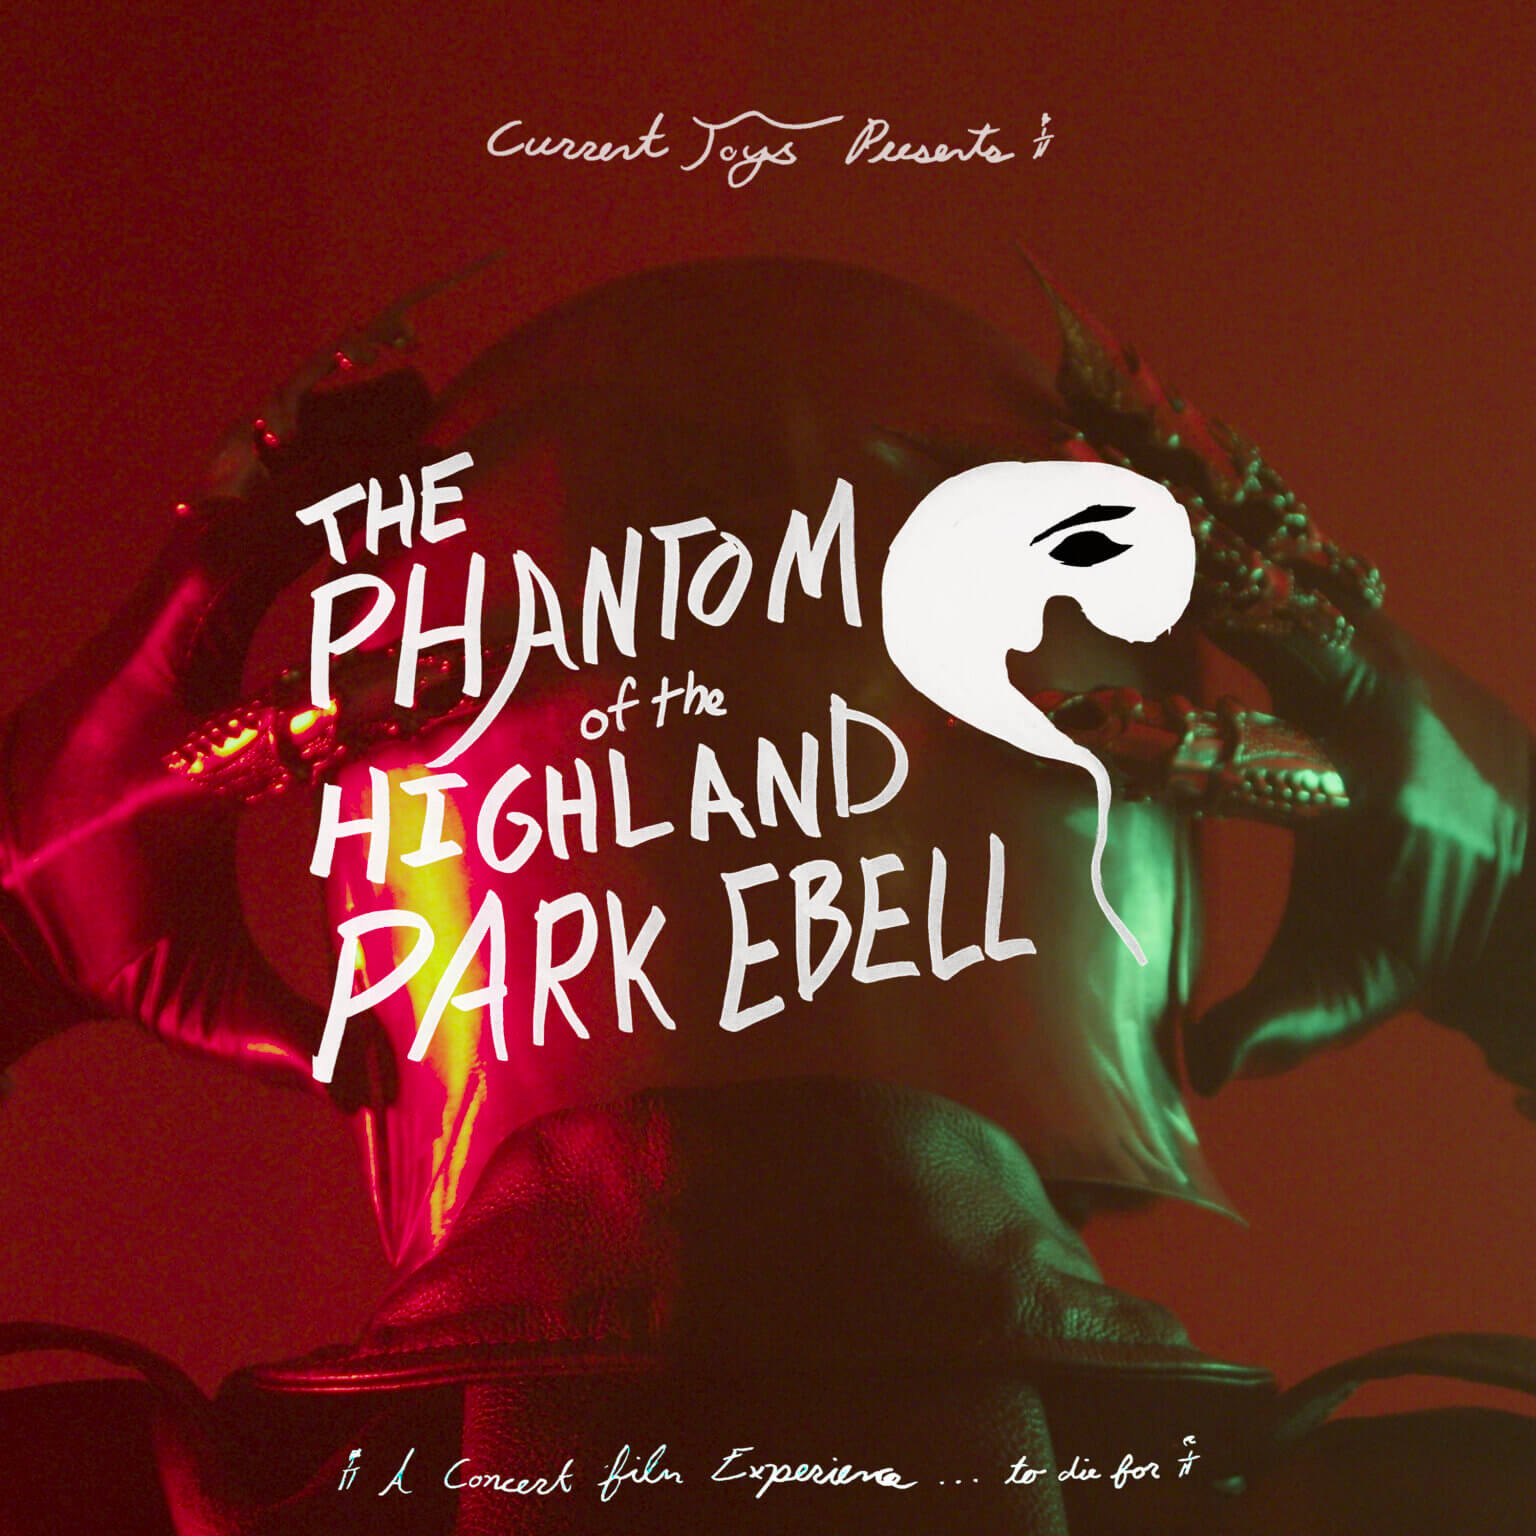 Current Joys, the project of Nick Rattigan, has teamed up with his visual collaborator Gary Canino on The Phantom of the Highland Park Ebell